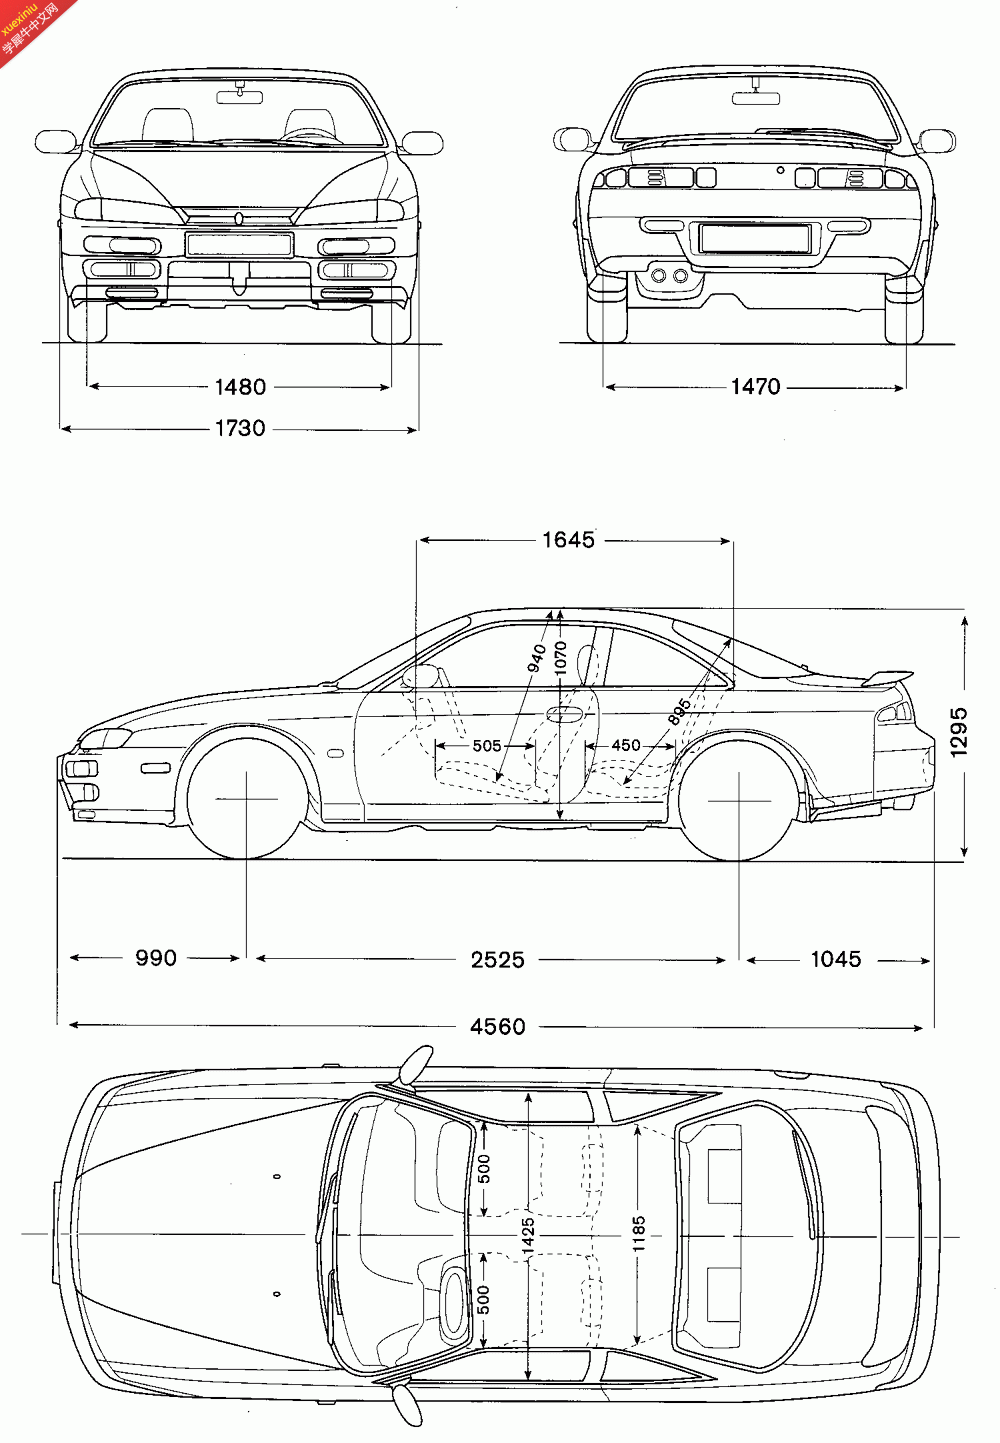 799079-nissan_200sx-embed.gif